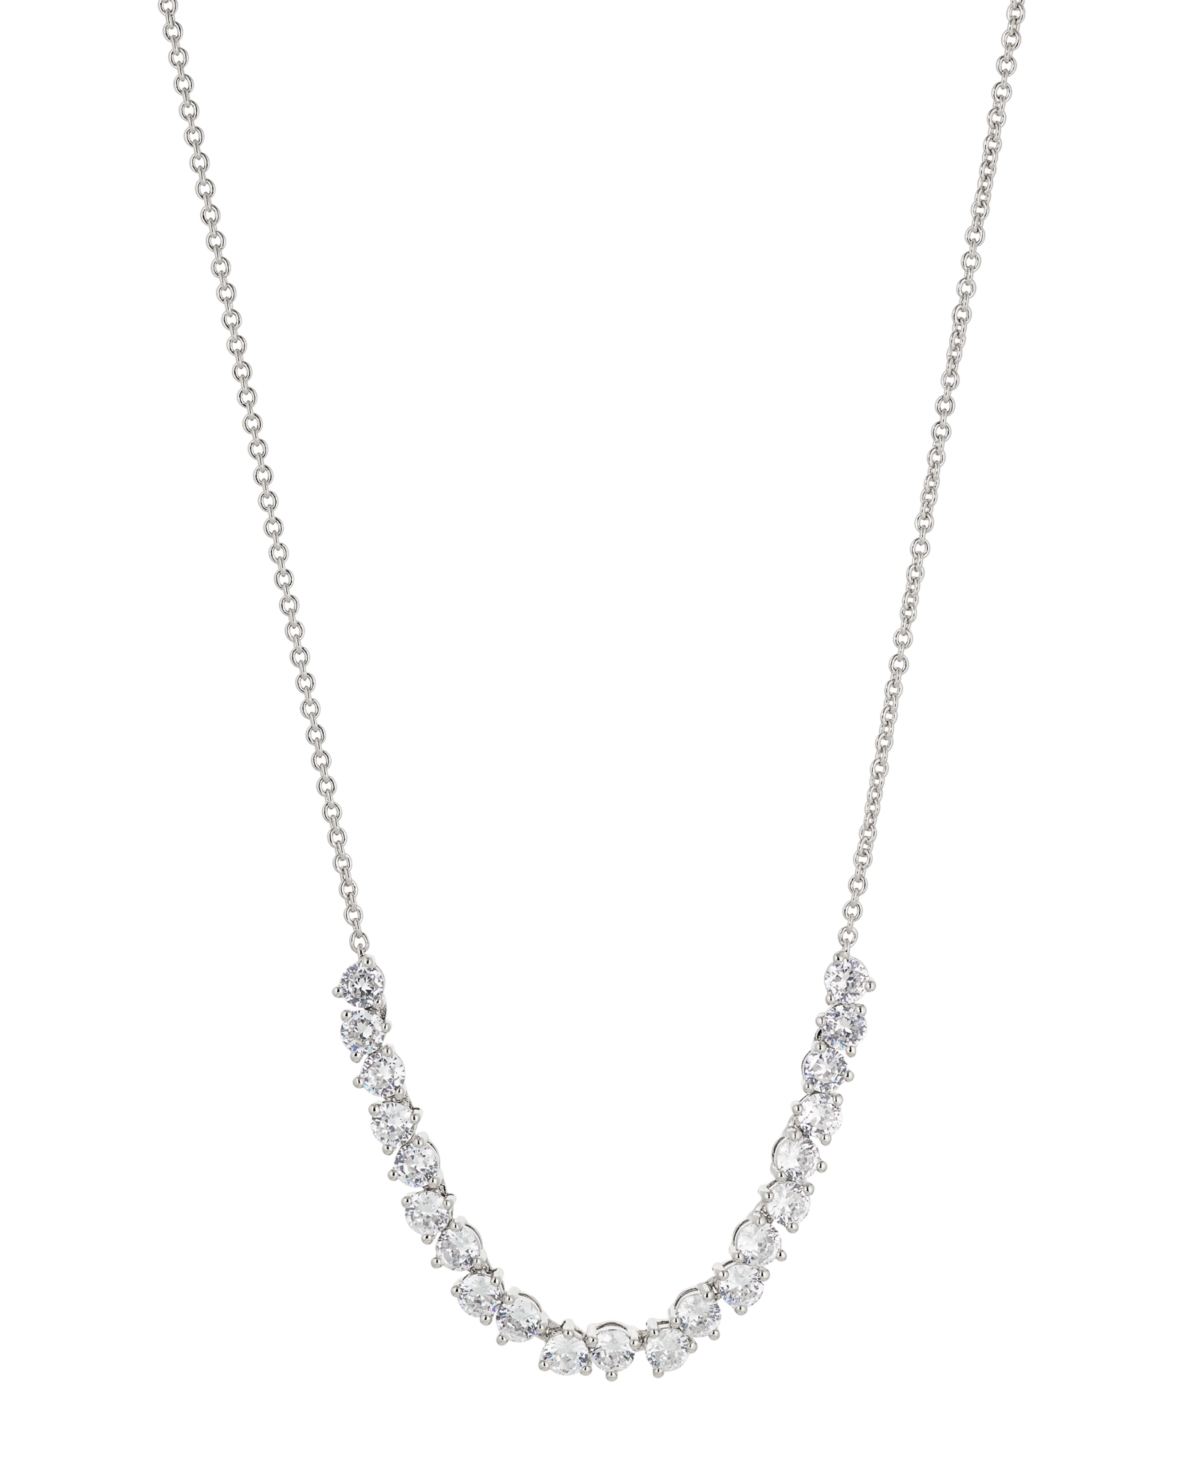 Eliot Danori Cubic Zirconia Frontal Tennis Necklace, Created For Macy's In Silver